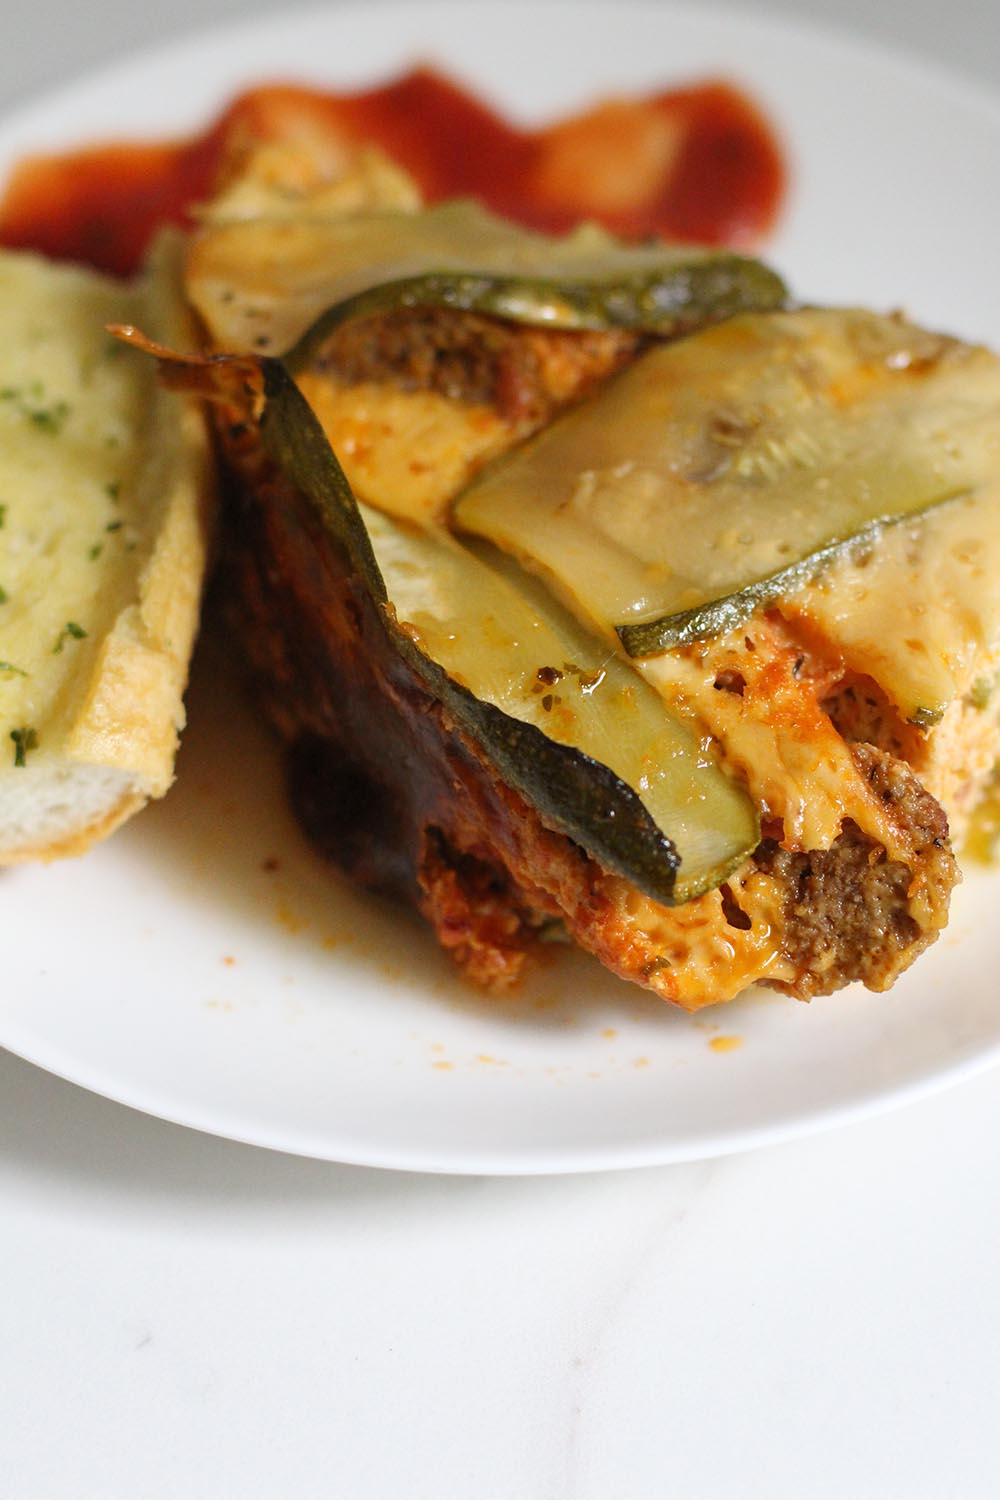 Slow Cooker Zucchini Lasagna with Meat Sauce